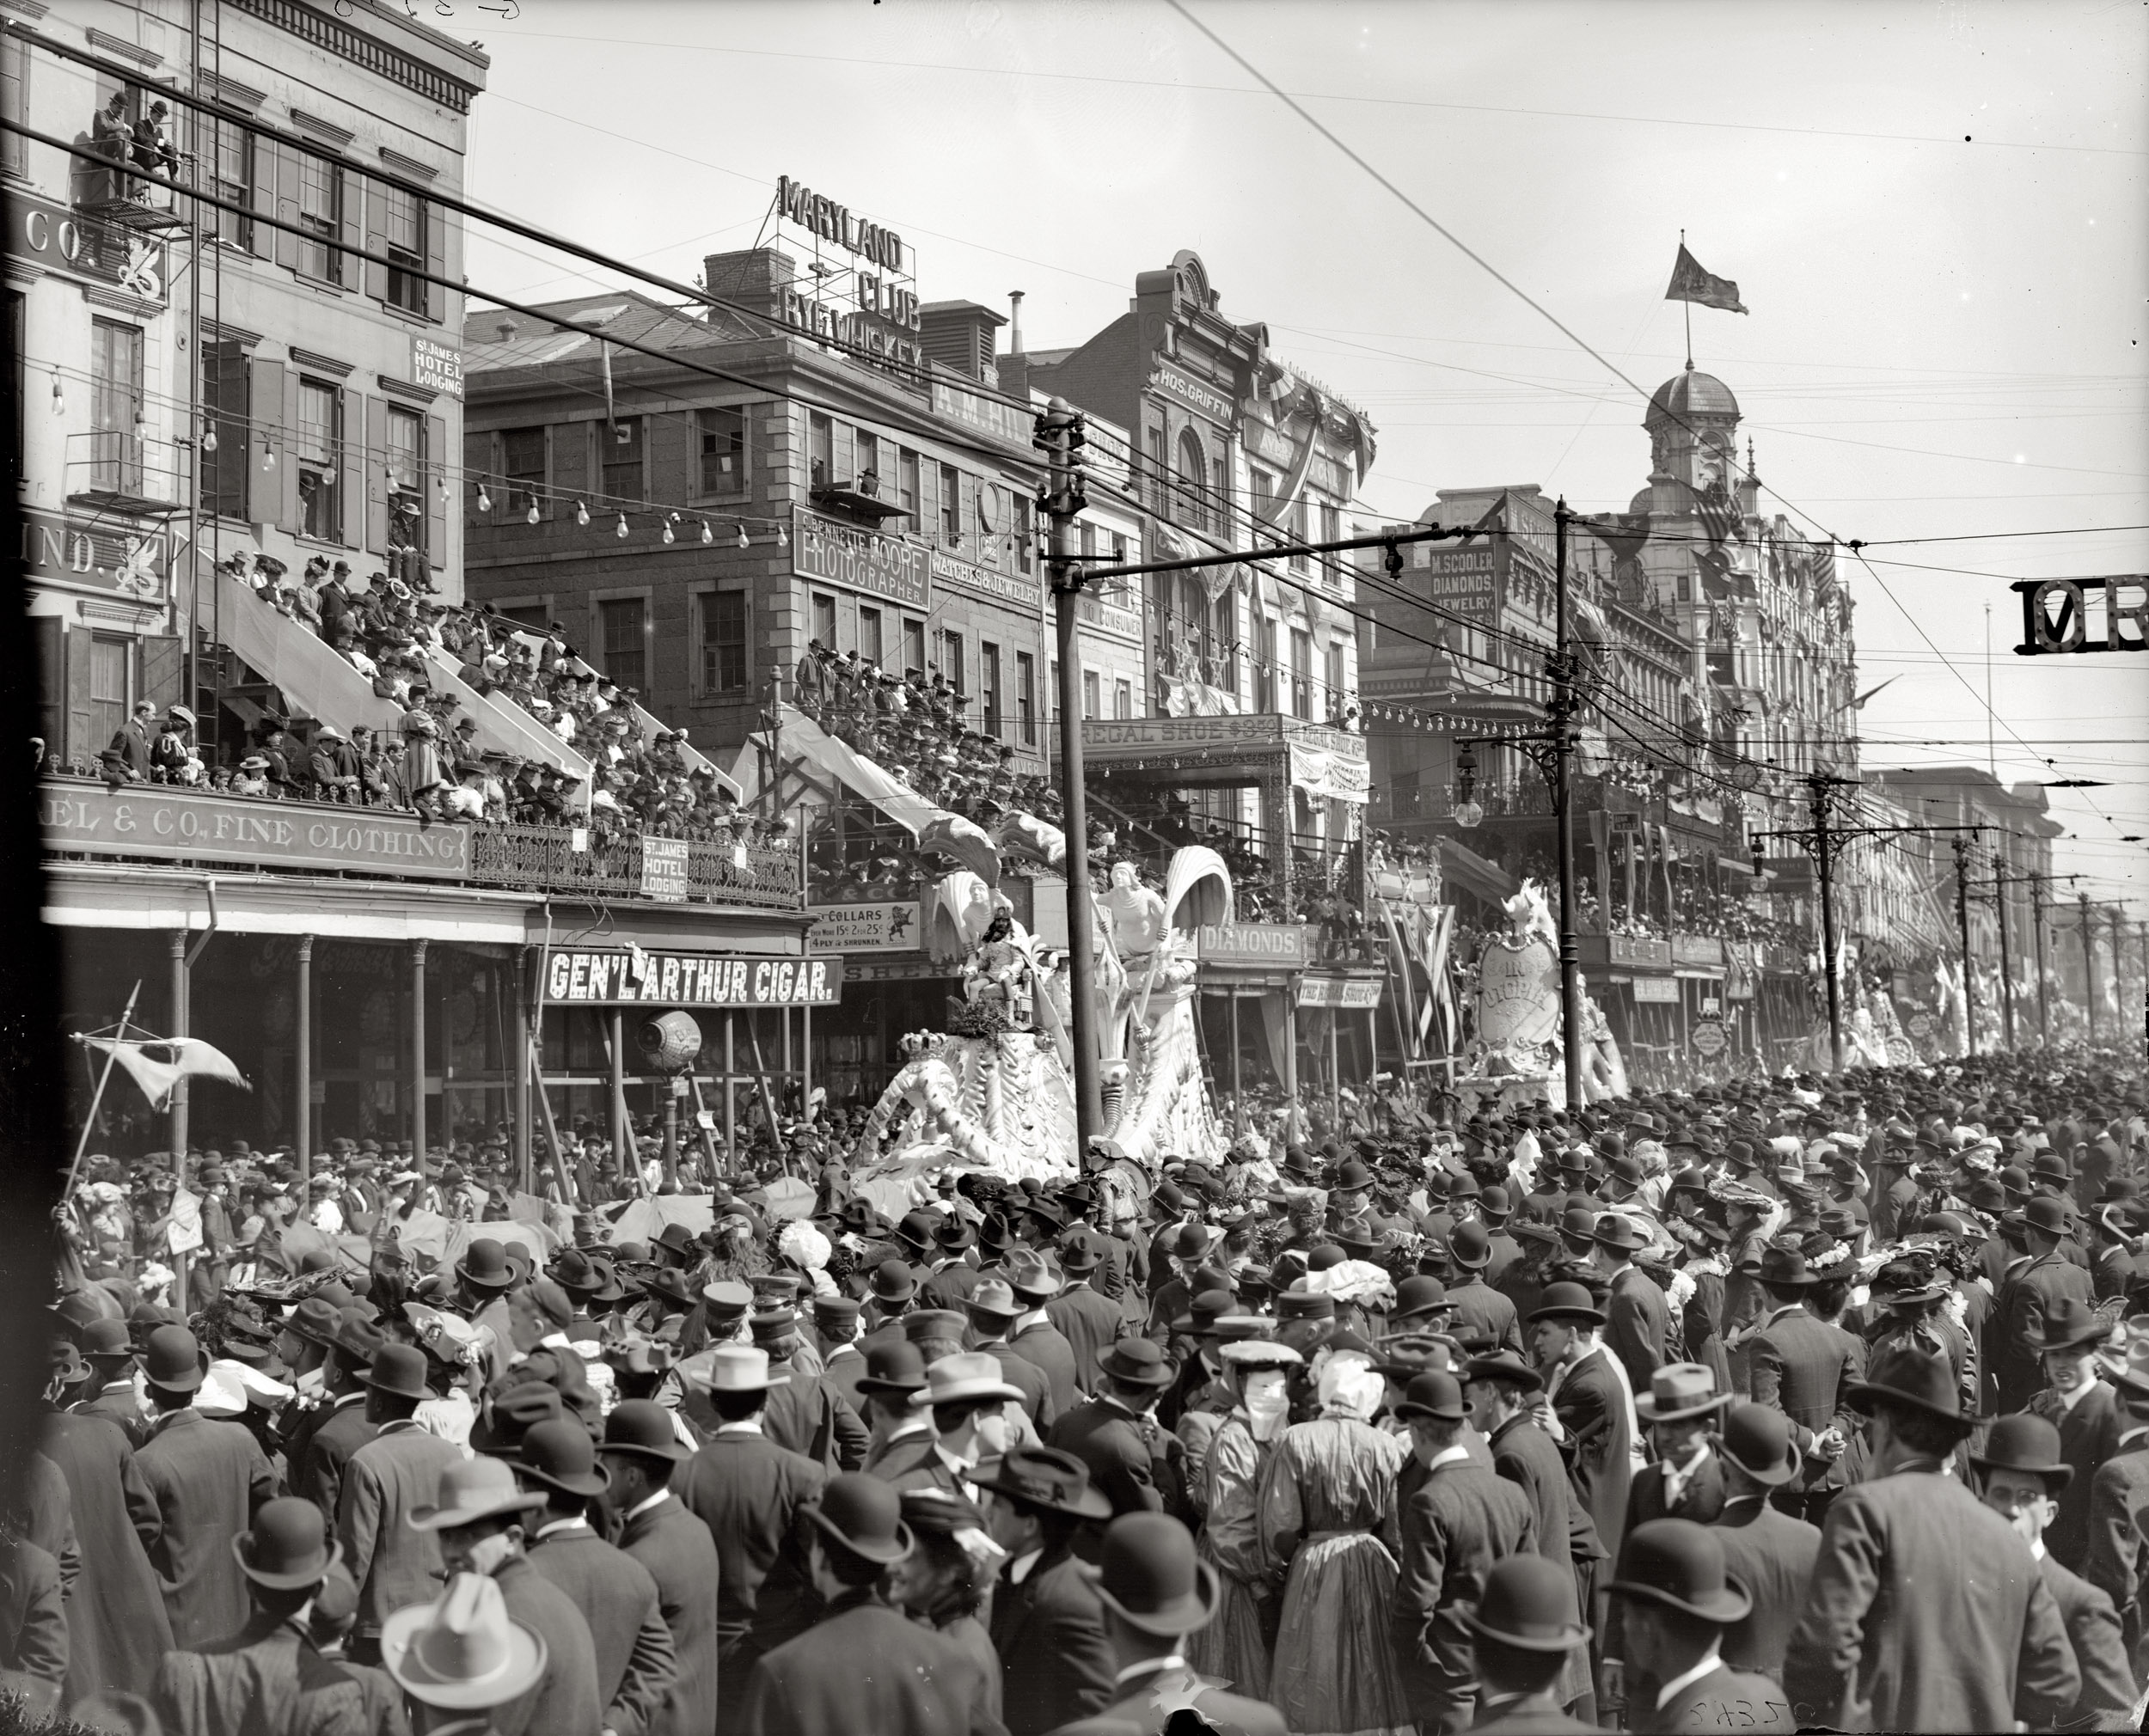 "Mardi Gras, New Orleans, the Red Pageant," circa 1900-1910. Detroit Publishing Company glass negative, Library of Congress. View full size.